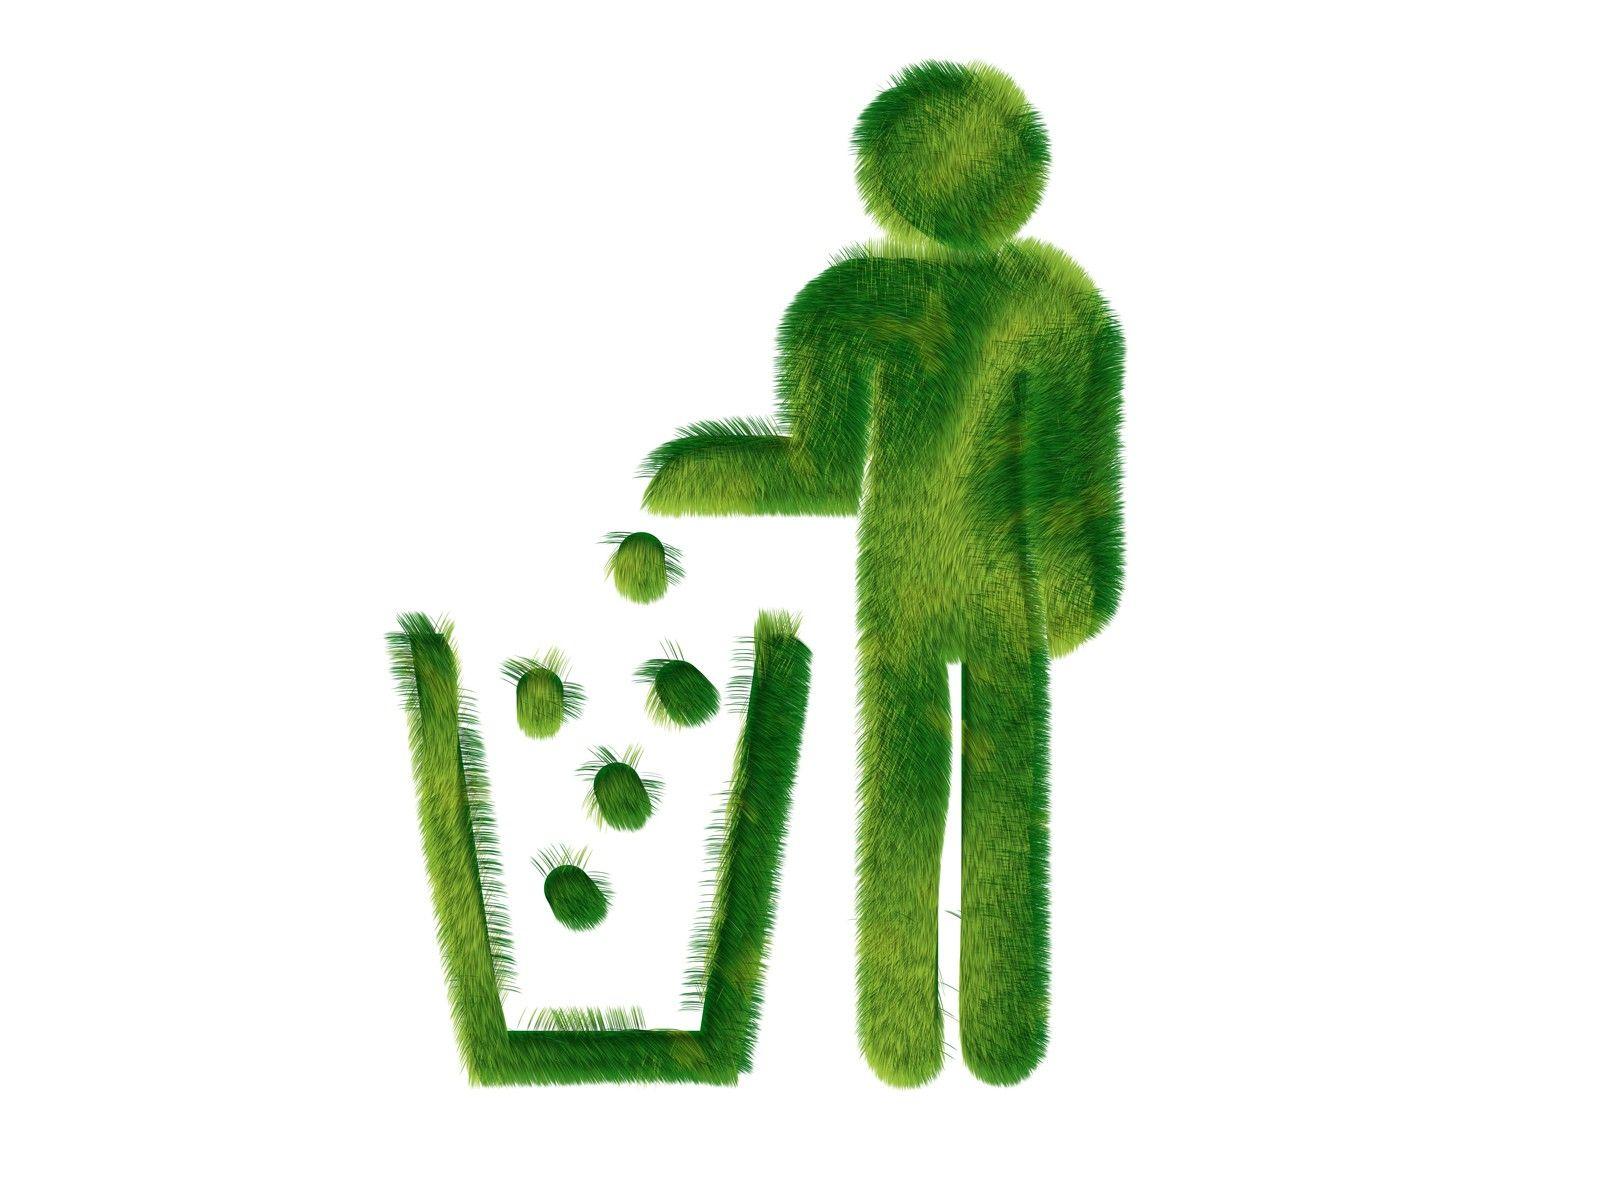 Recycling for Guernsey updated... - Recycling for Guernsey